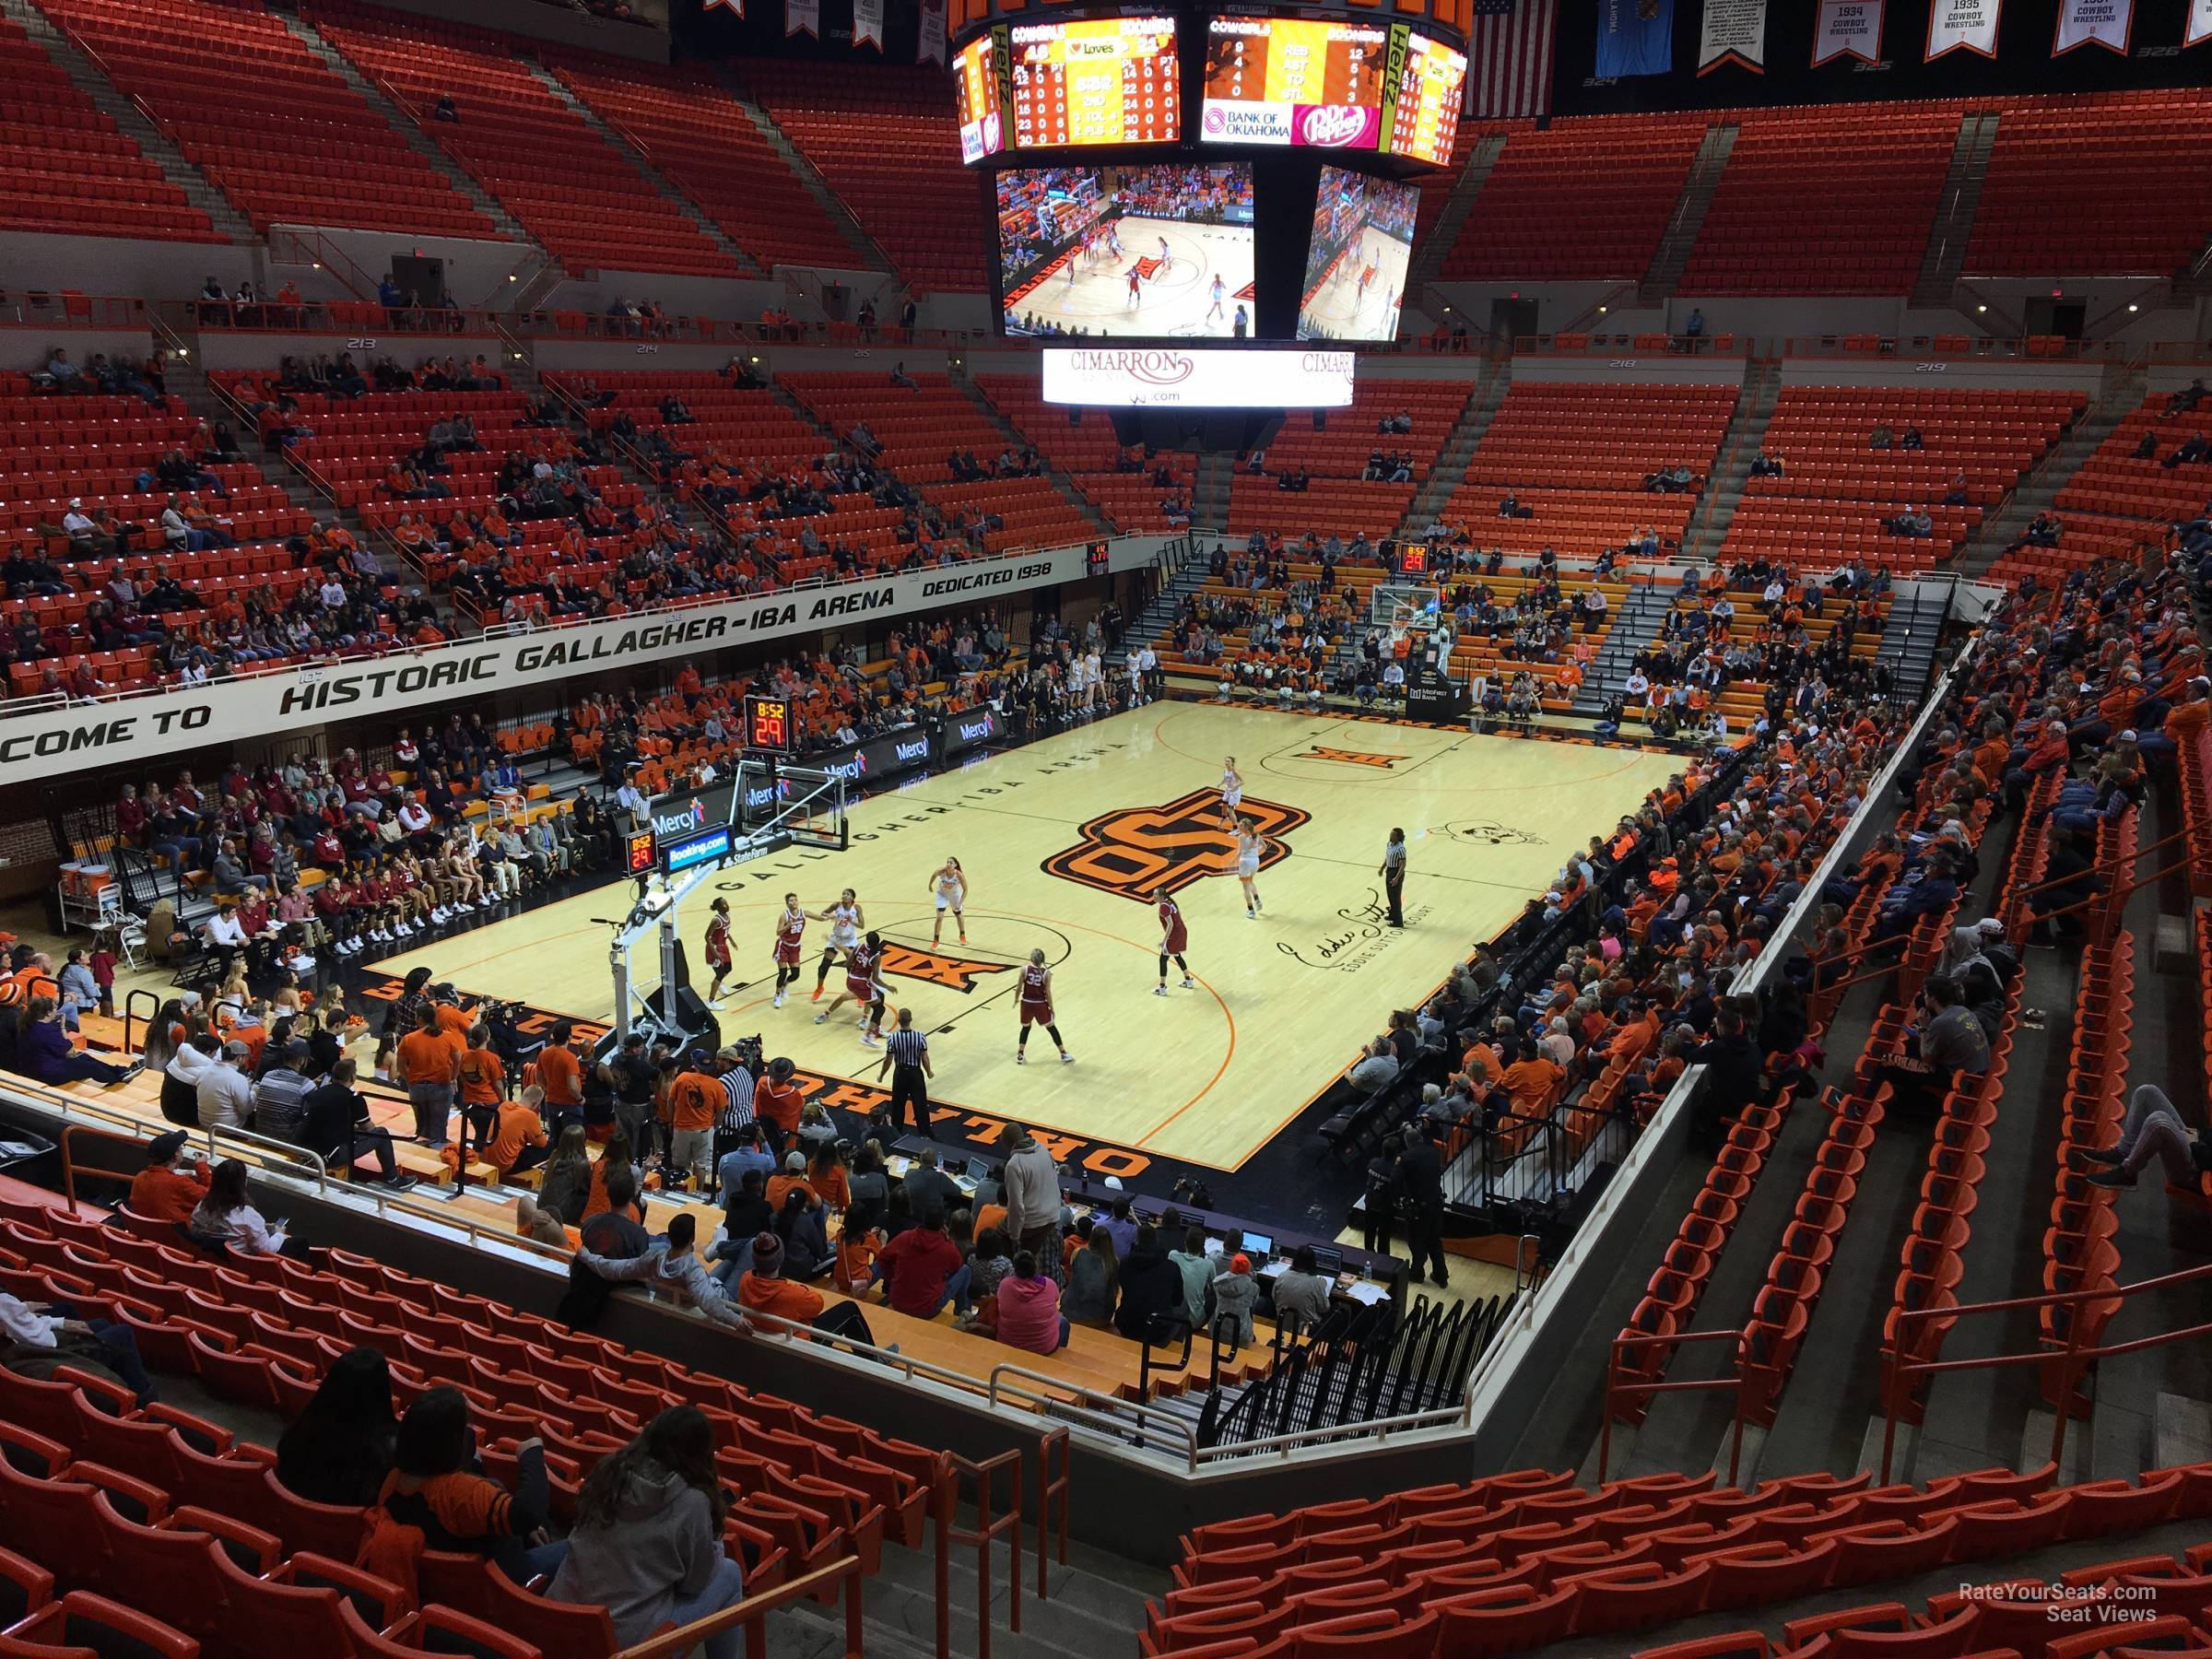 section 206, row 13 seat view  - gallagher-iba arena